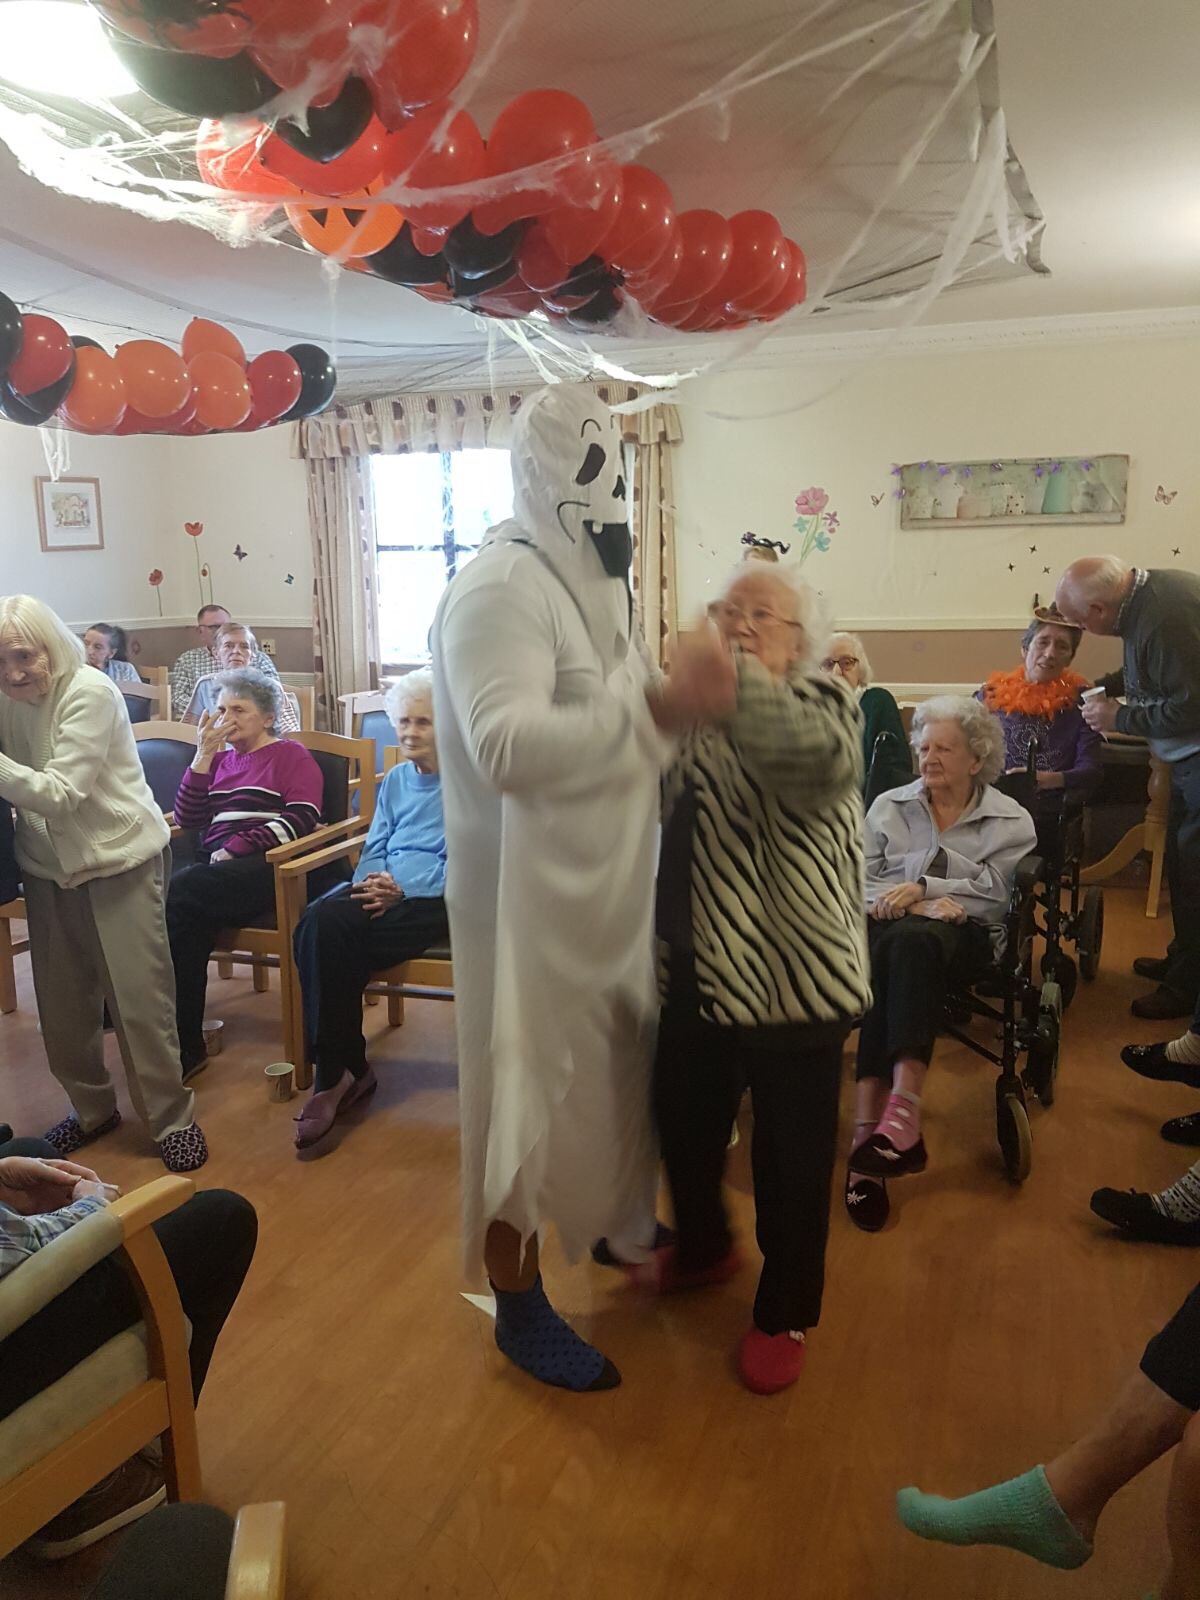 Ghost Busters or Dancers!: Key Healthcare is dedicated to caring for elderly residents in safe. We have multiple dementia care homes including our care home middlesbrough, our care home St. Helen and care home saltburn. We excel in monitoring and improving care levels.